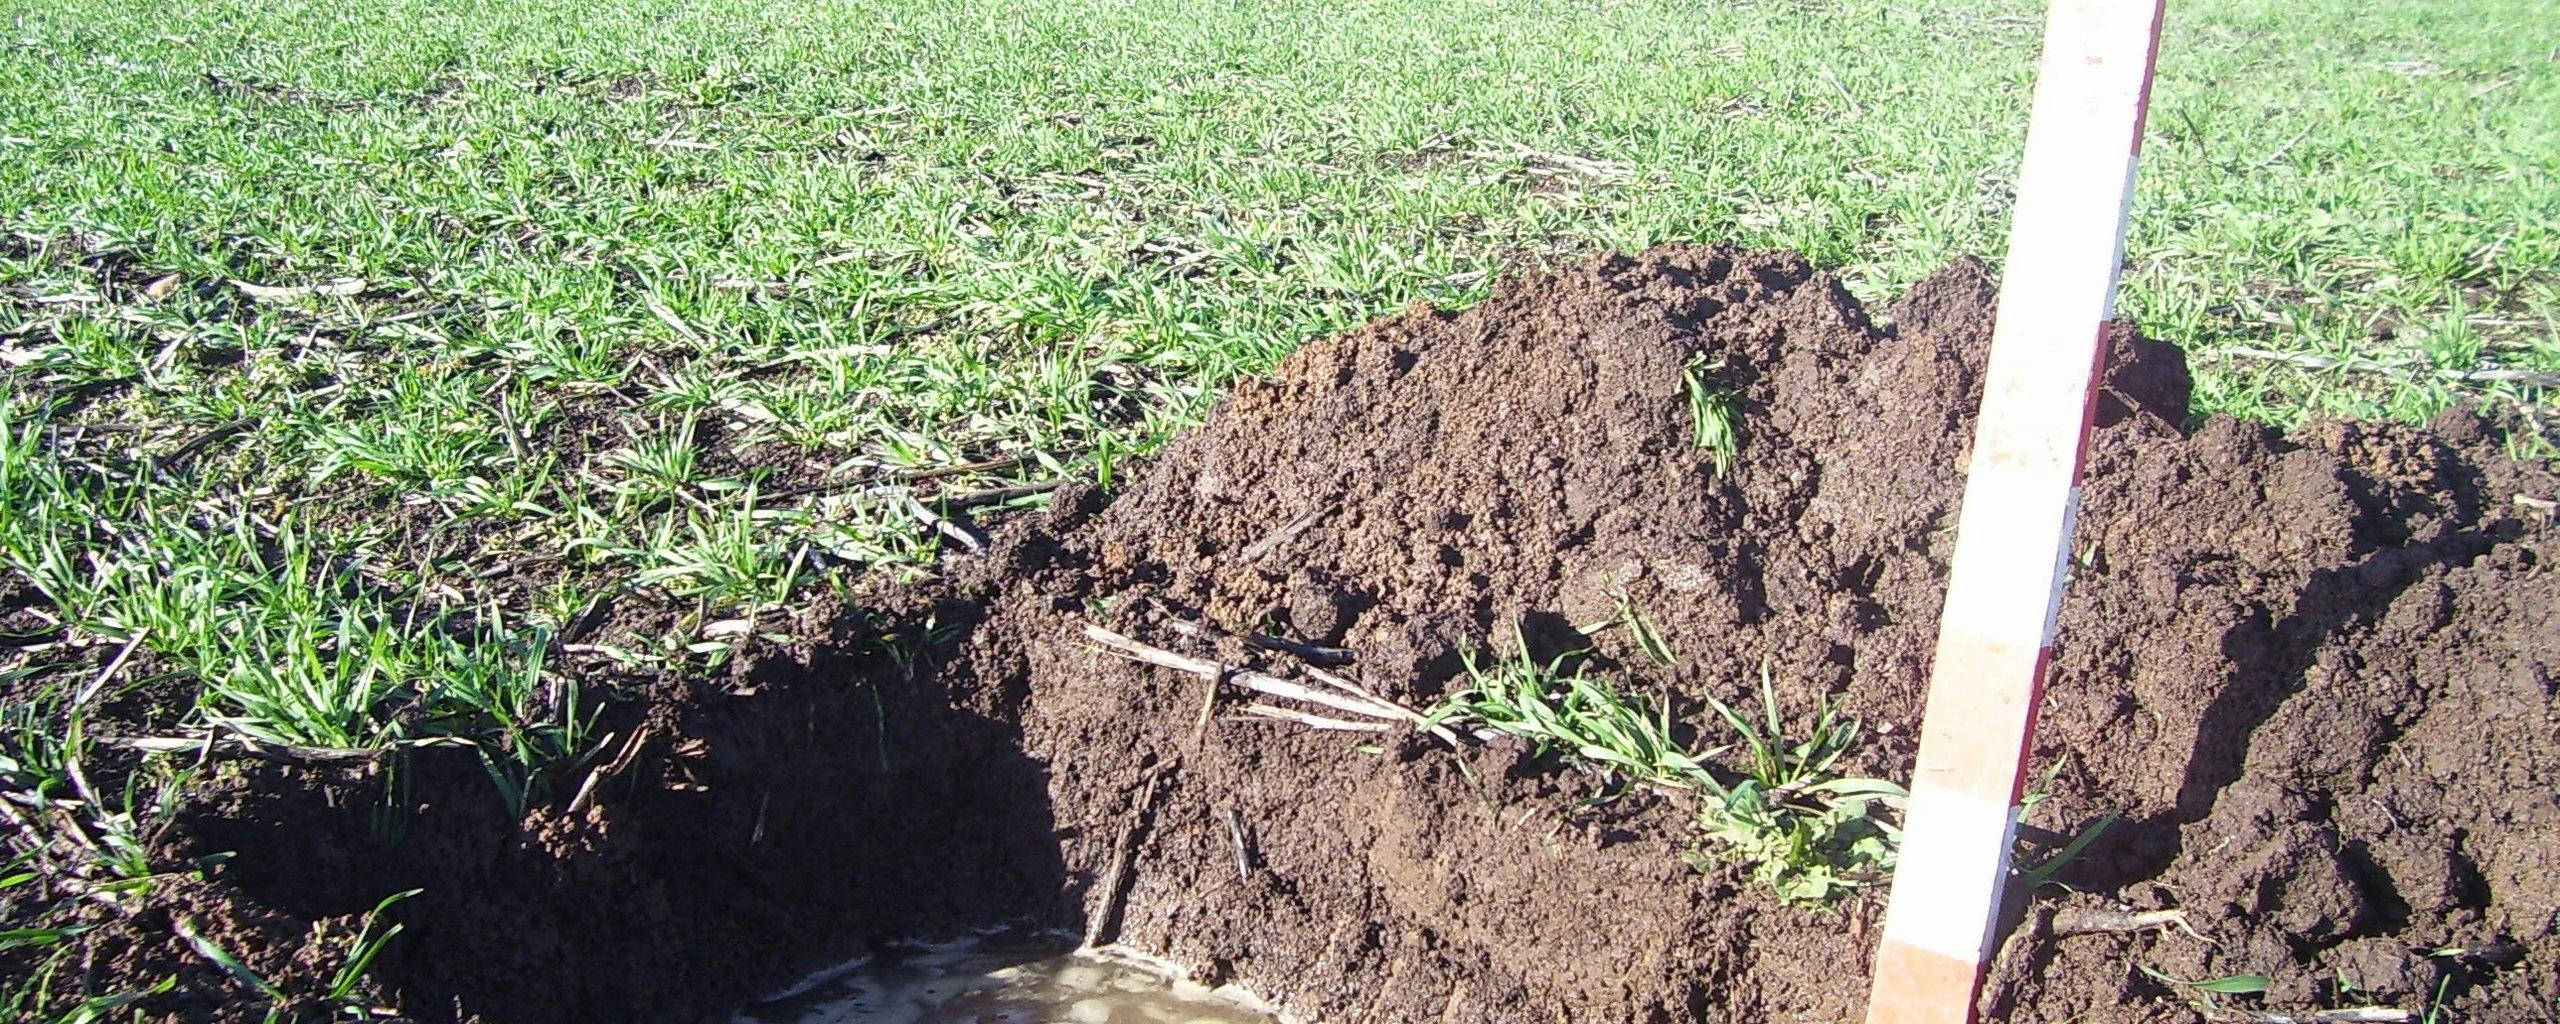 Figure 30. A shallow water table identified when digging a pit to inspect soil conditions.